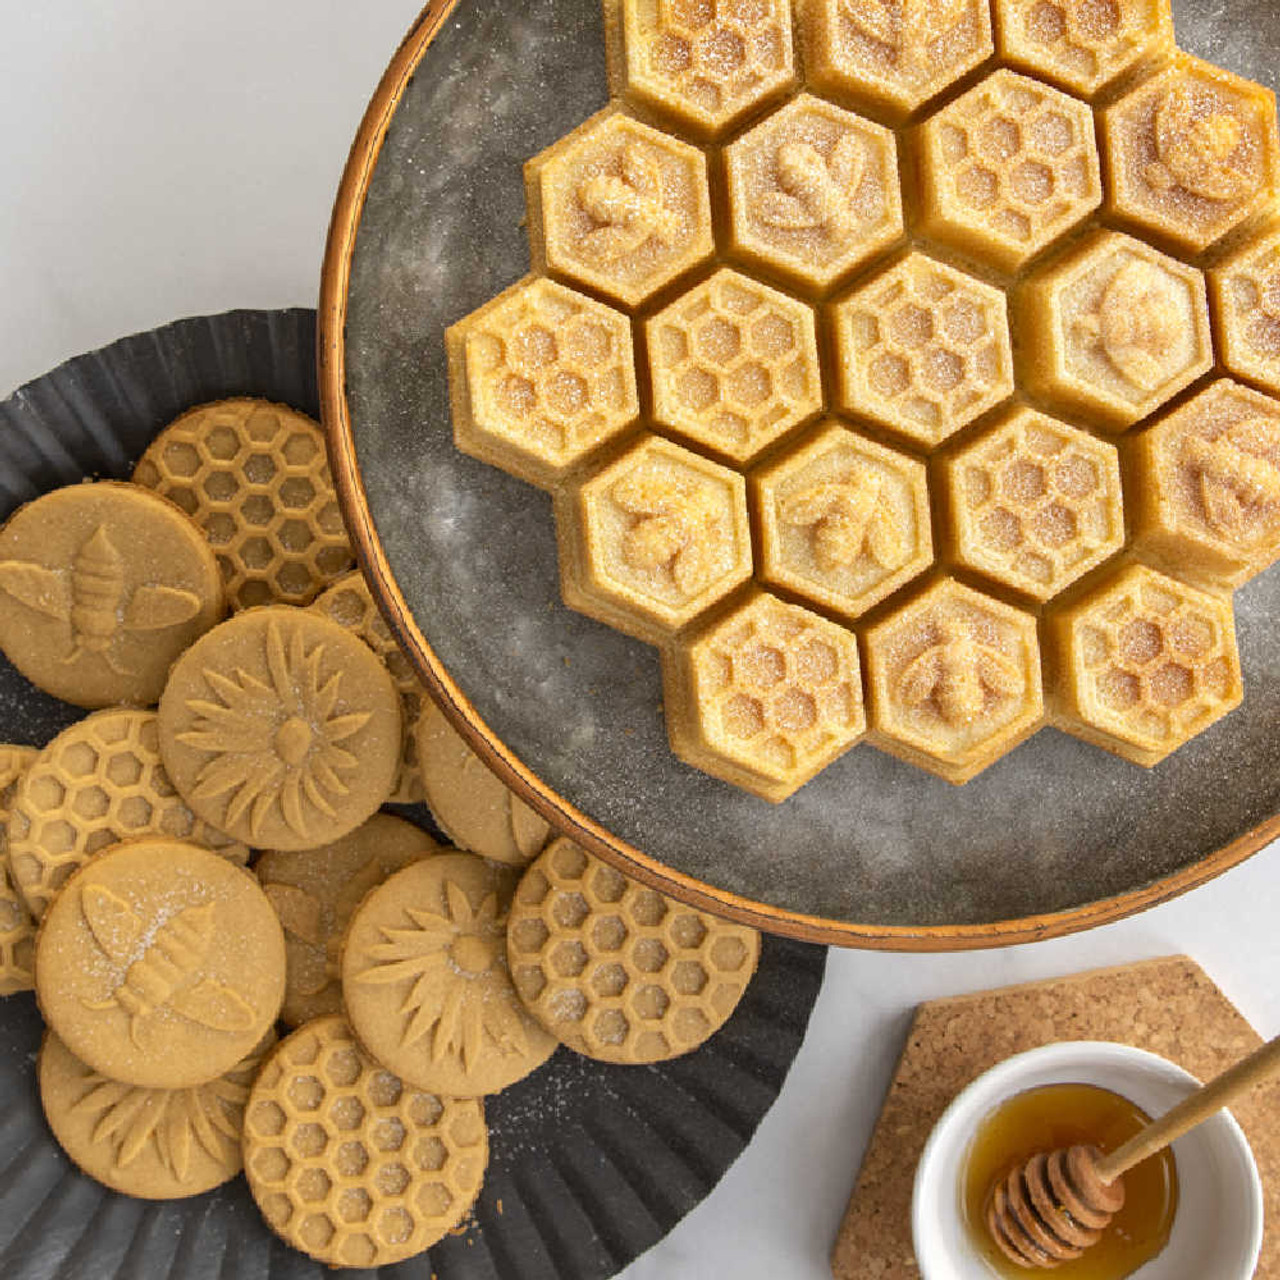 https://cdn11.bigcommerce.com/s-hccytny0od/images/stencil/1280x1280/products/4428/17291/Nordic_Ware_Honeycomb_Pull-Apart_Pan_1__23670.1638390302.jpg?c=2?imbypass=on